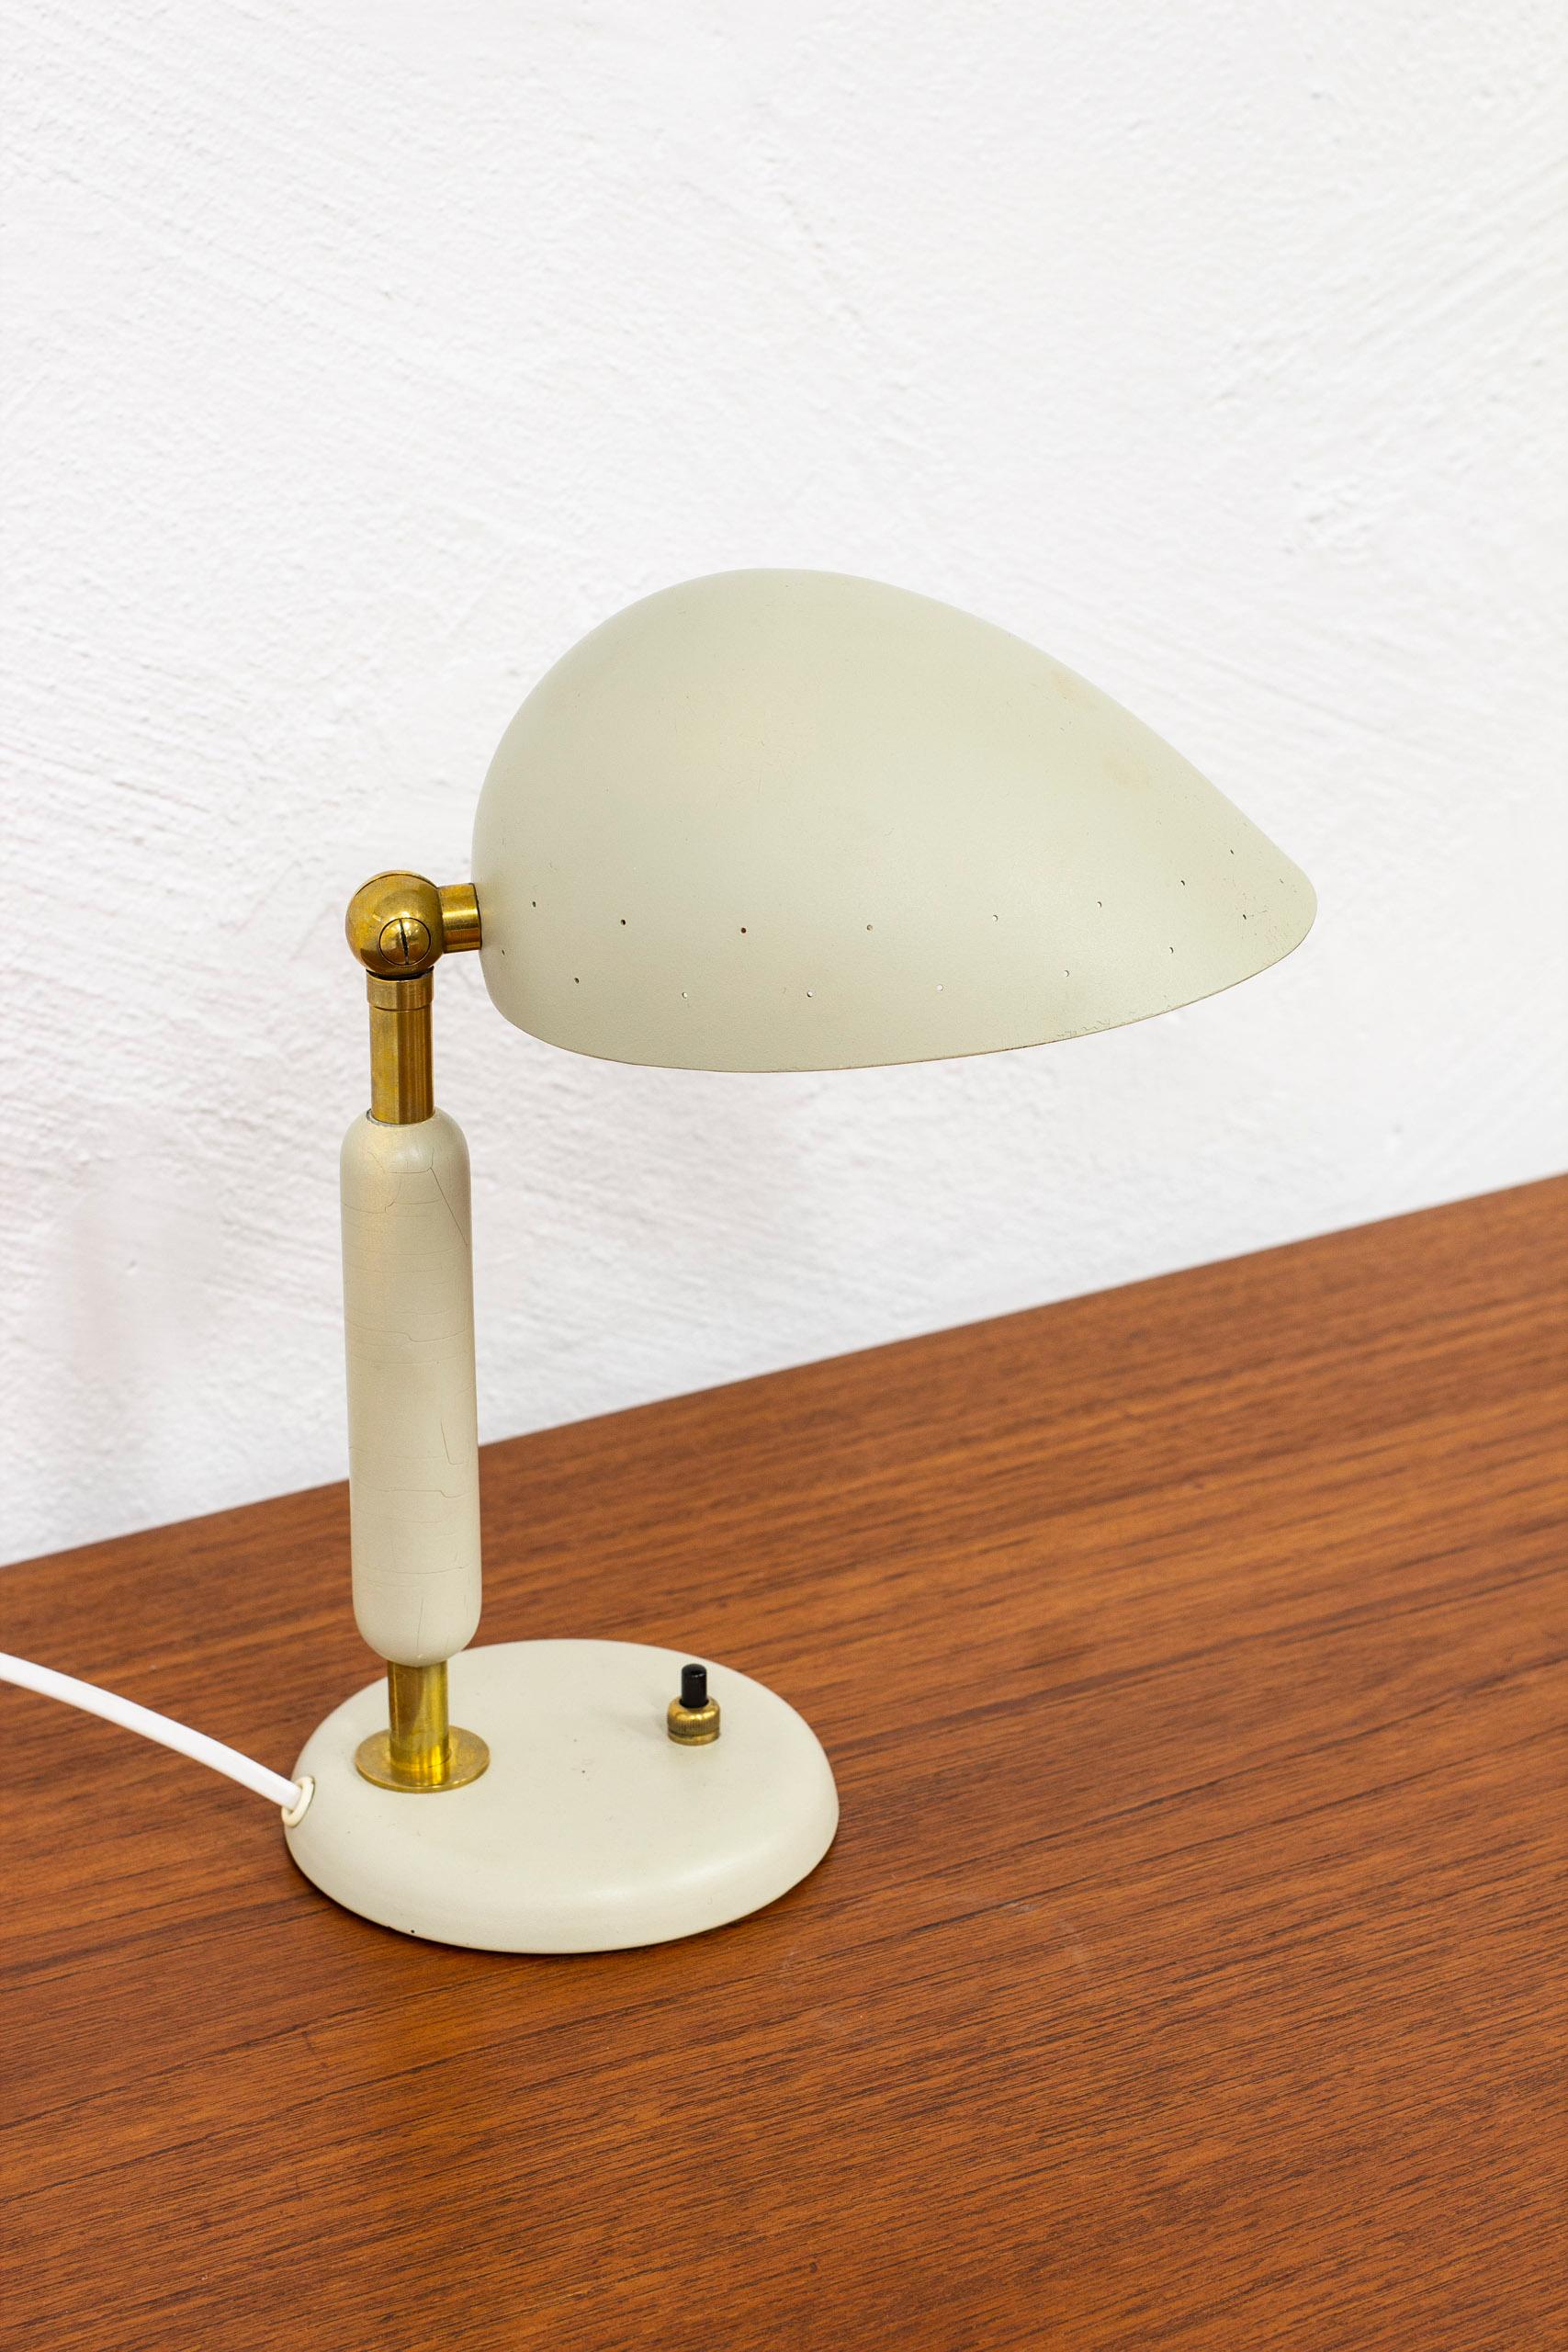 Table lamp designed by Harald Notini. Produced in Stockholmn, Sweden by Böhlmarks lampfabrik during the 1940-50s. Made from brass, lacquered wood and aluminum. Light switch on the base in working order. Adjustable shade. Good vintage condition with